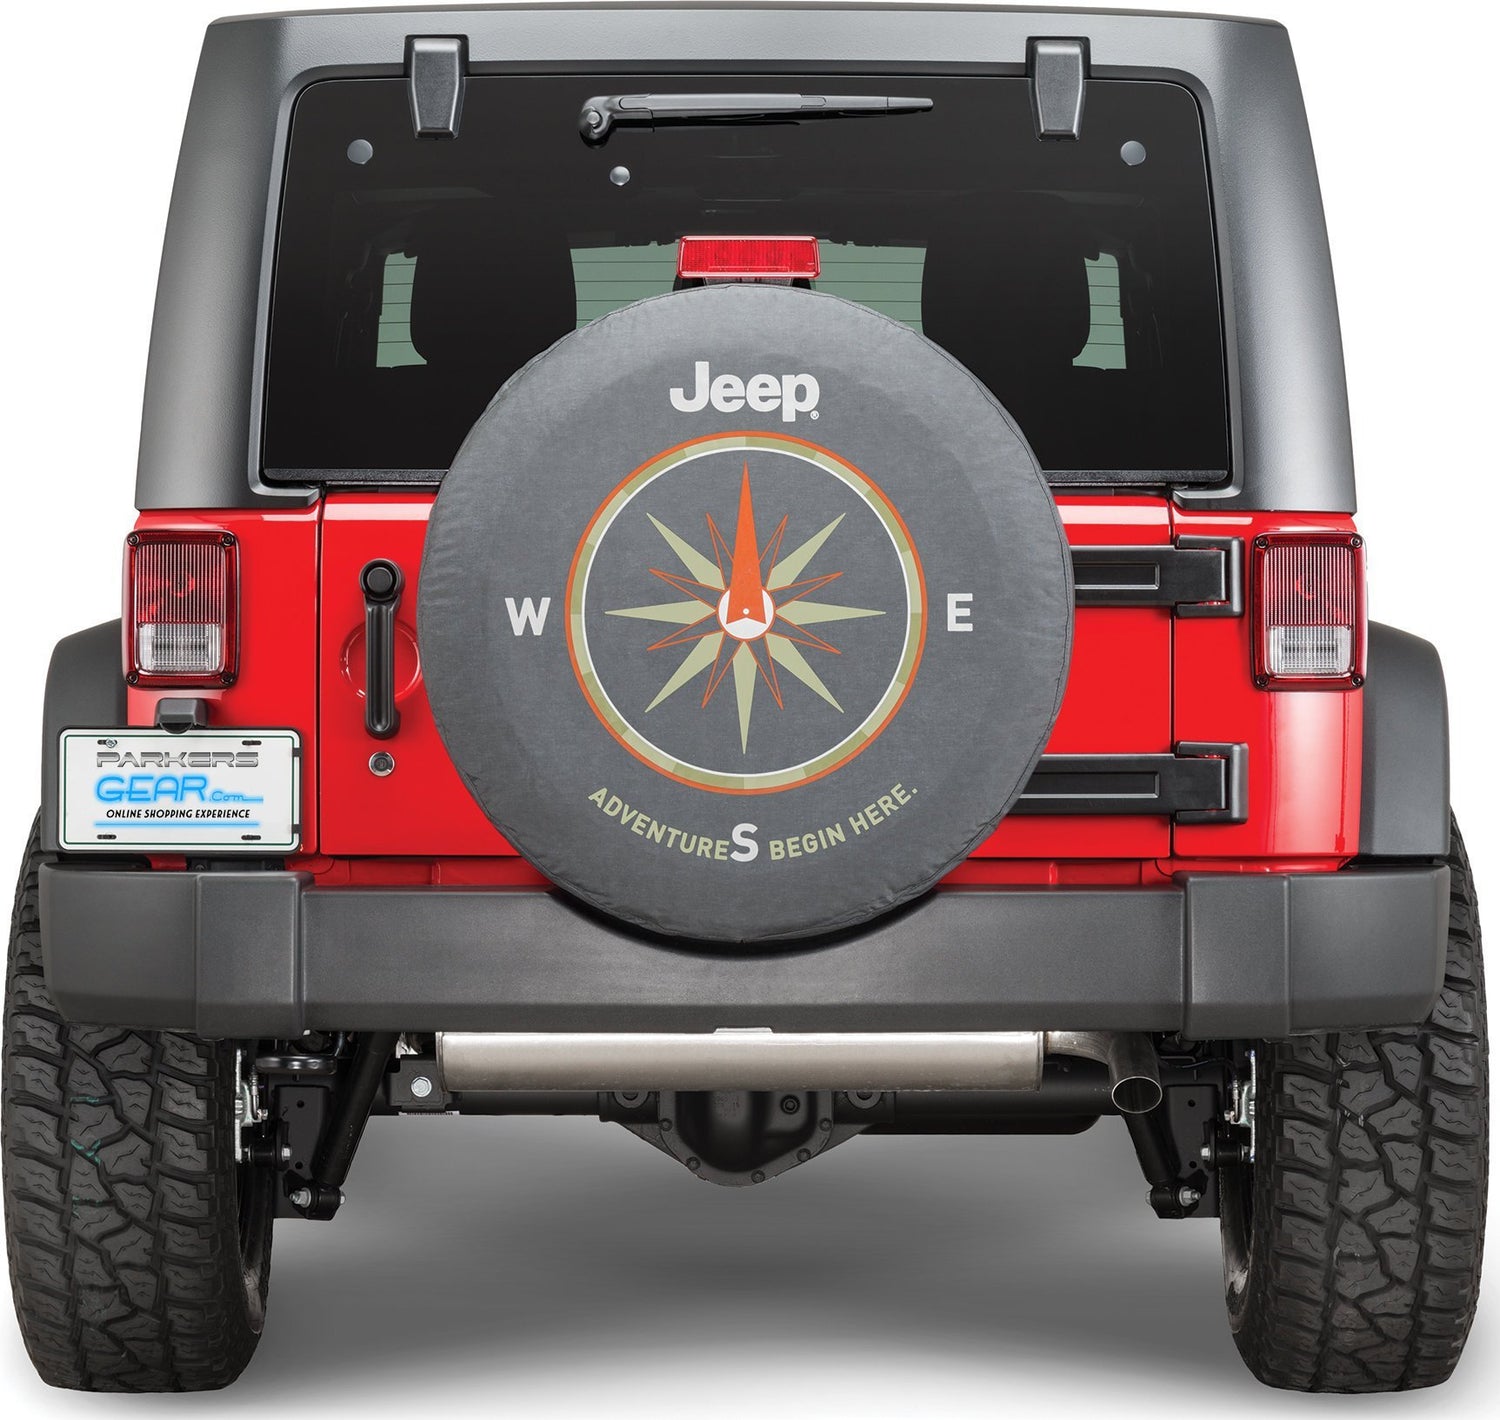 Jeep Spare Tire Cover - The Adventure Begins Here Logo on Black Denim - Jeep Tire Cover